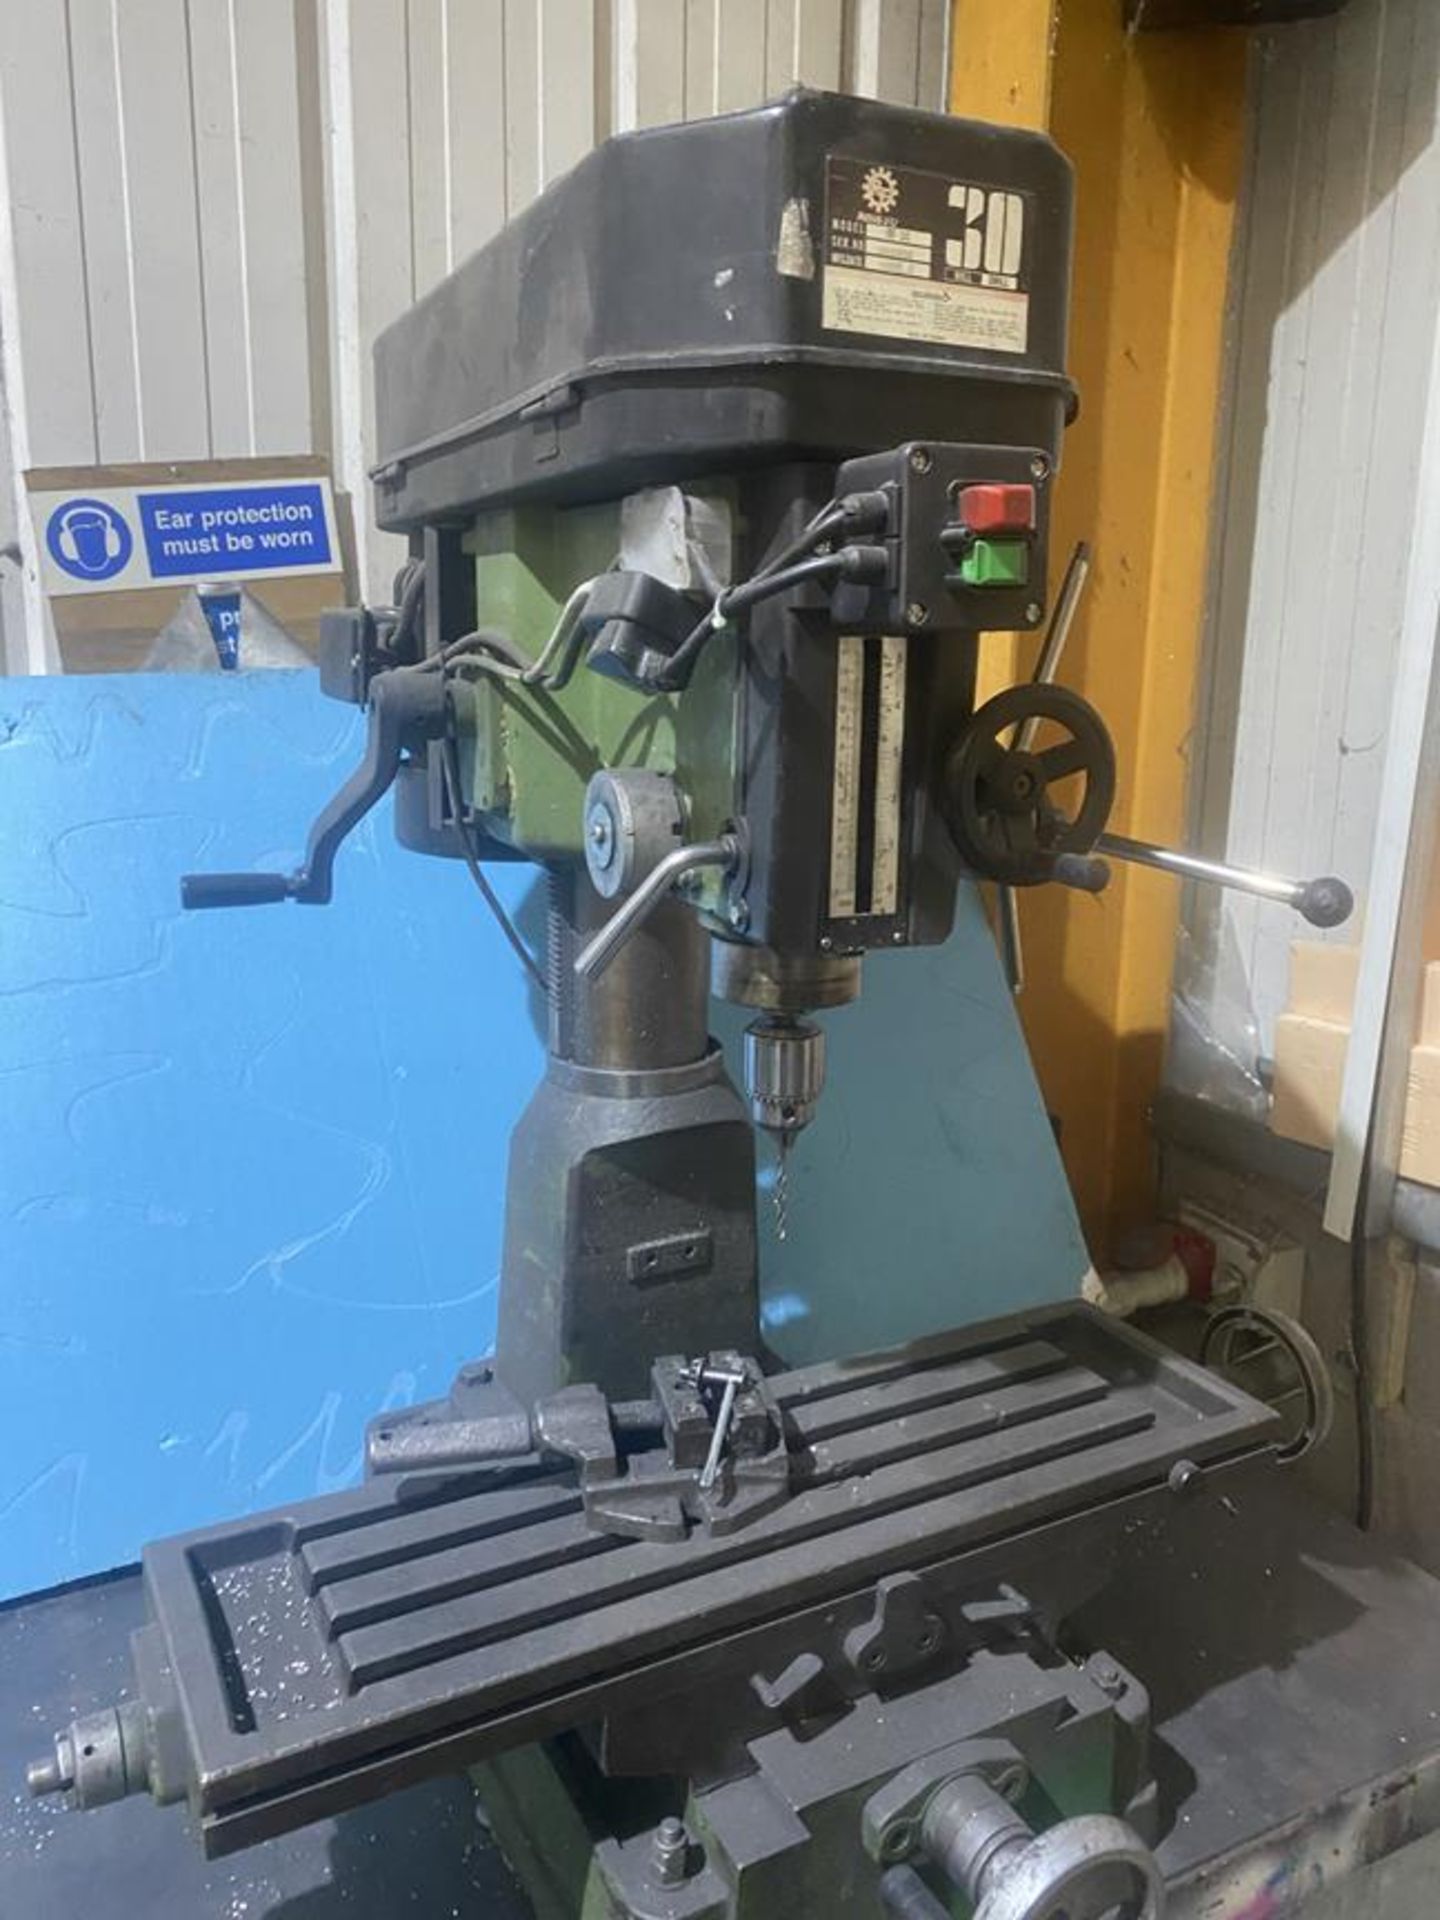 Kong bench top milling machine model RF30 mounted to steel workbench, serial No 982550 with 4"